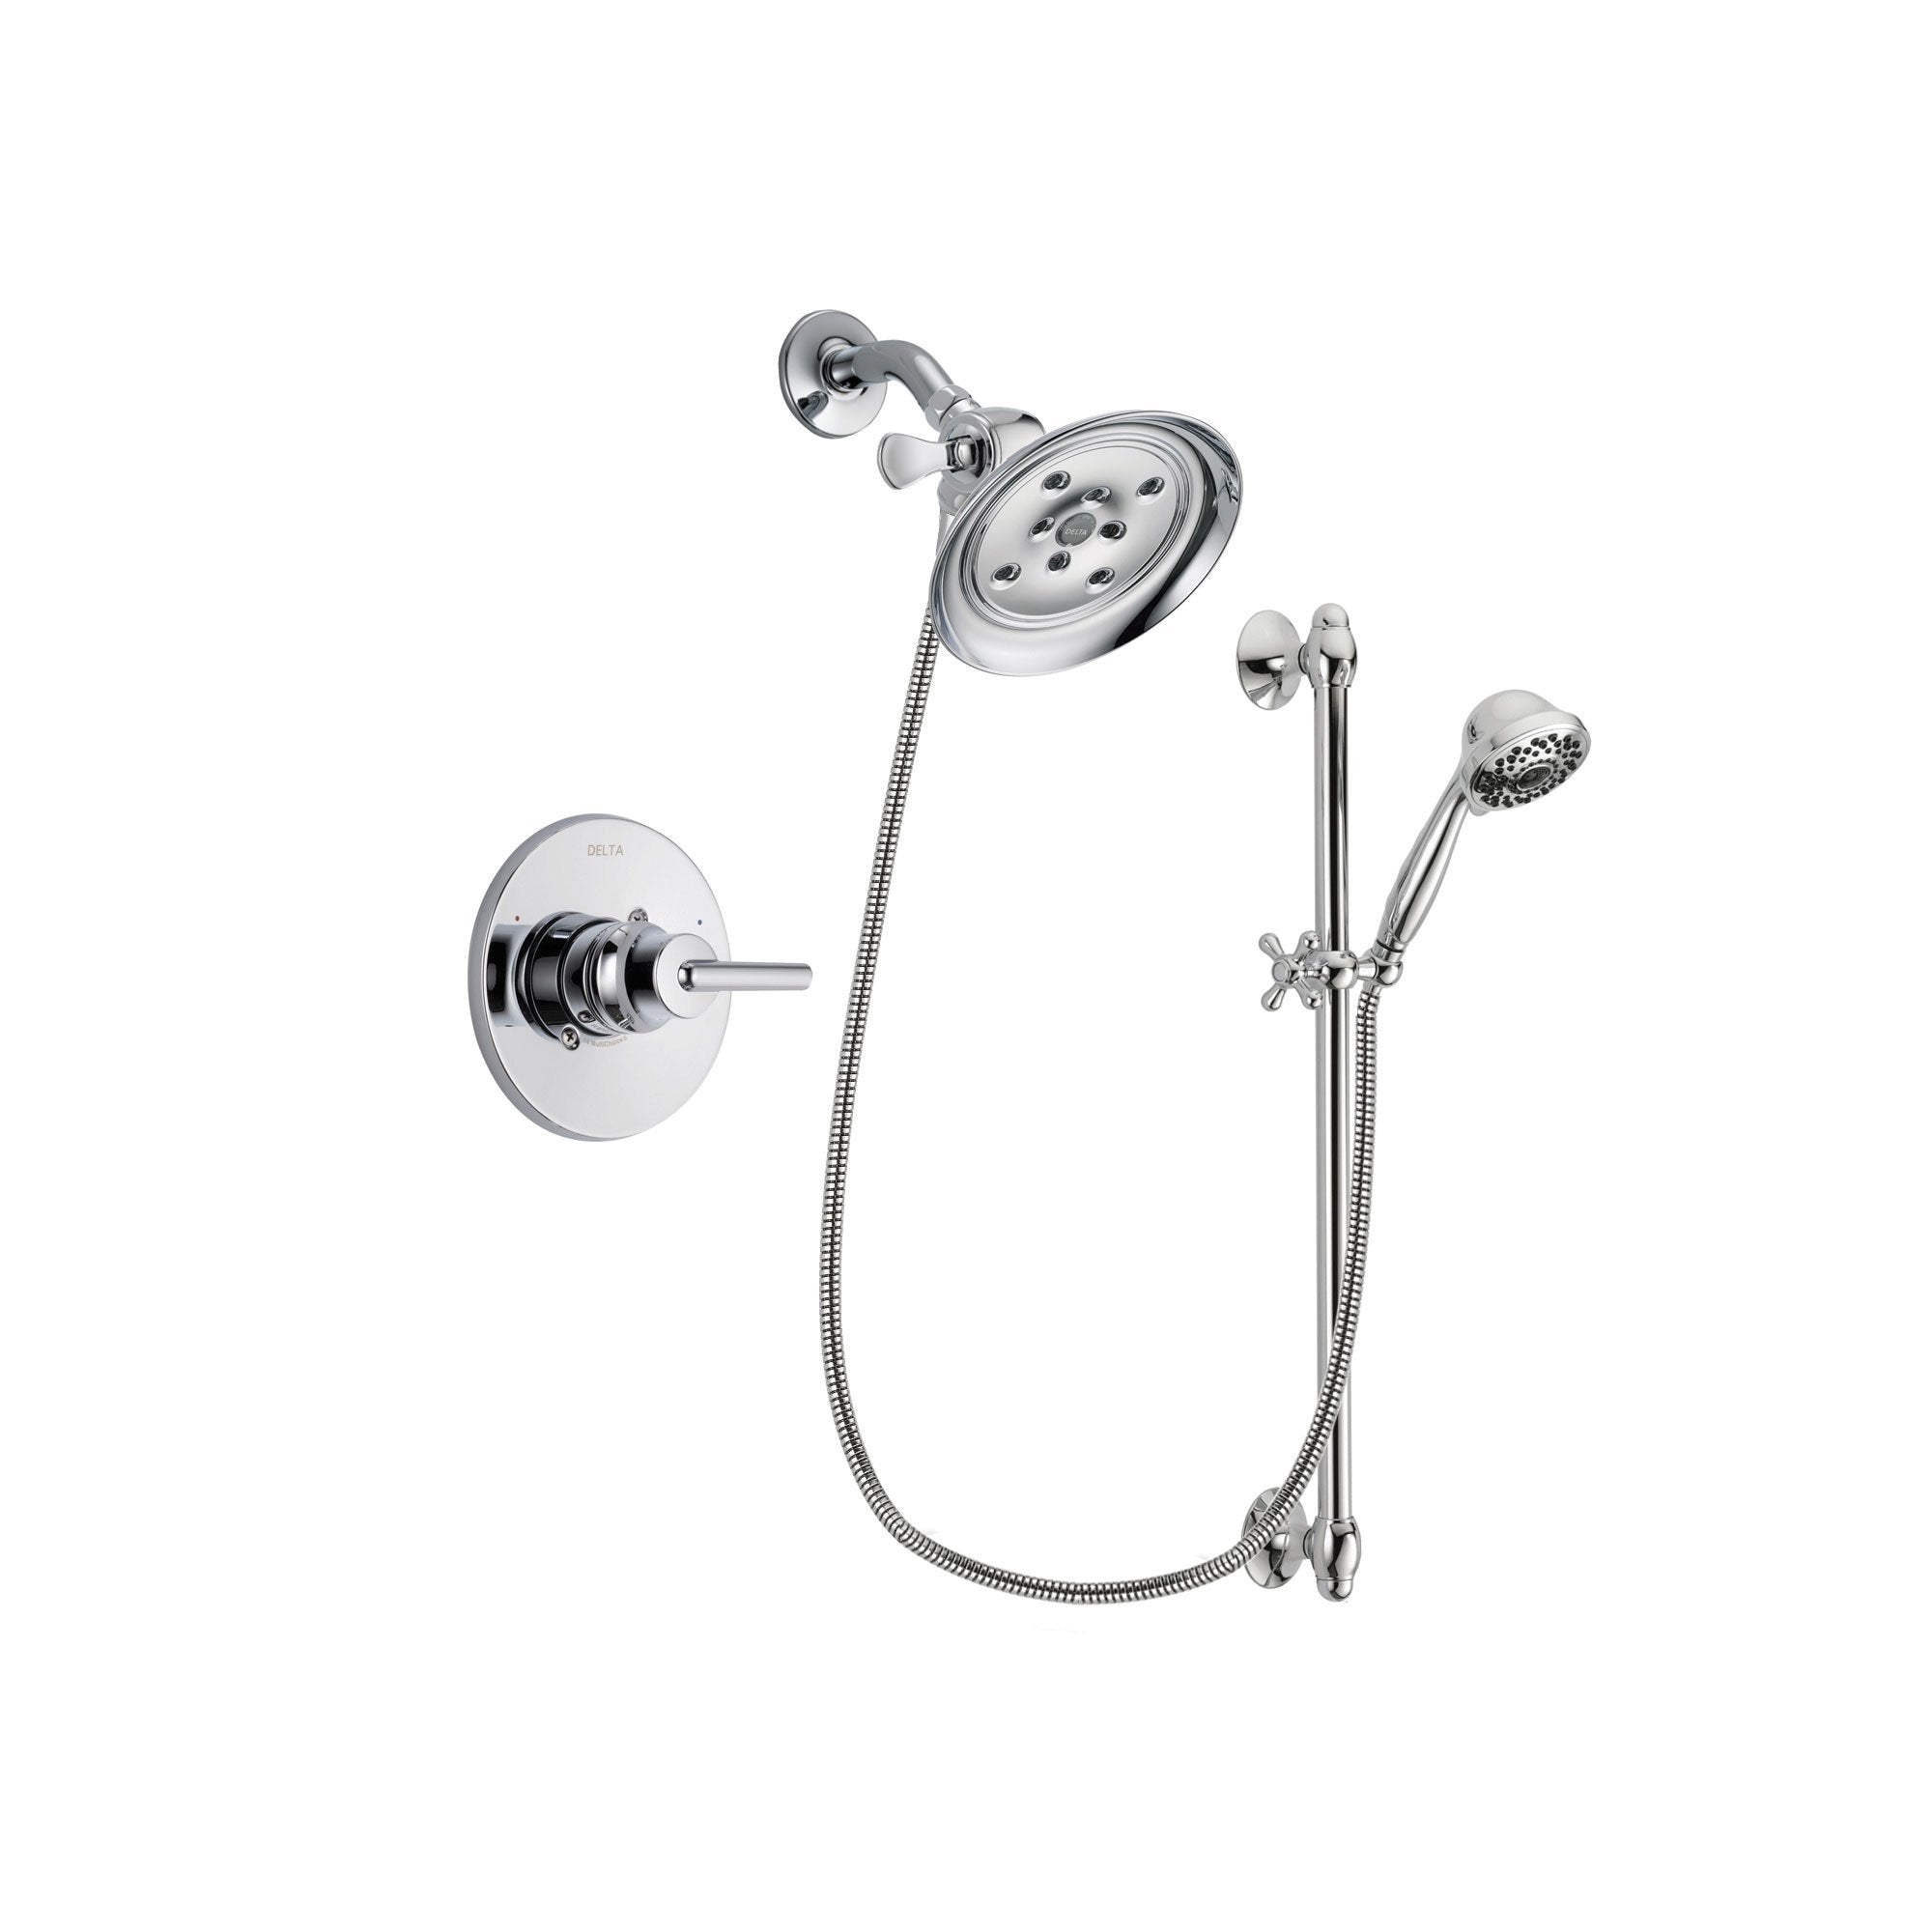 Delta Trinsic Chrome Shower Faucet System w/ Showerhead and Hand Shower DSP0642V